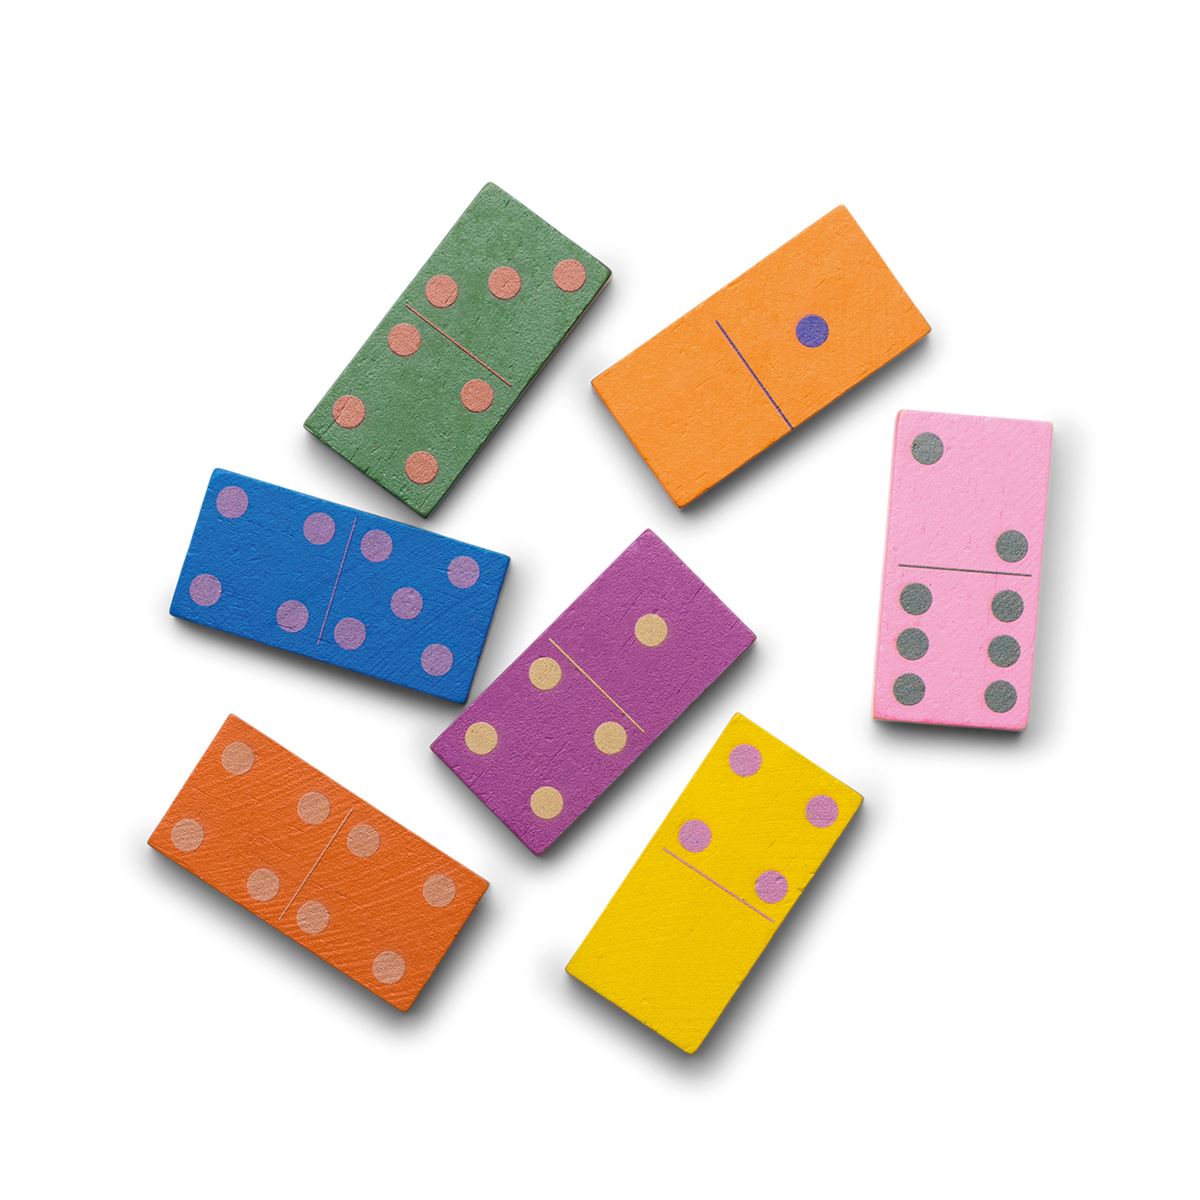 Dominos - Wooden Table Top Game